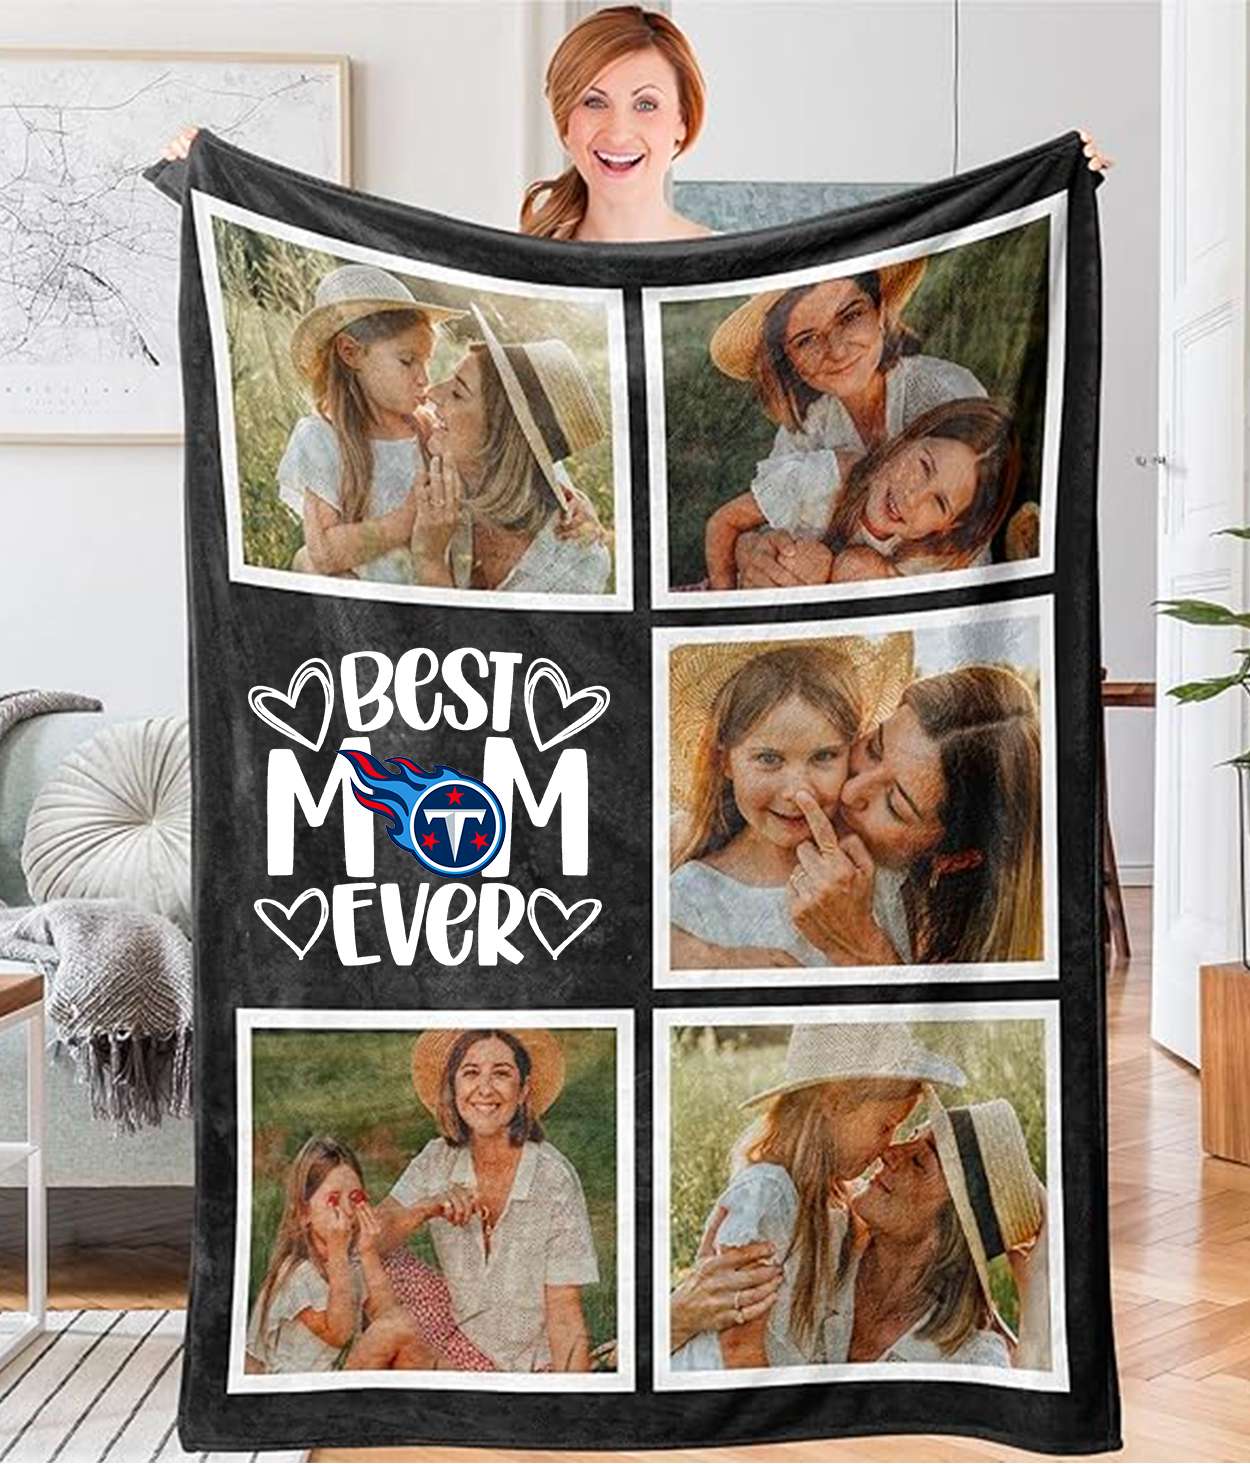 Best Mom Ever - Custom NFL Tennessee Titans Blankets with Pictures for Mother's Day Gift